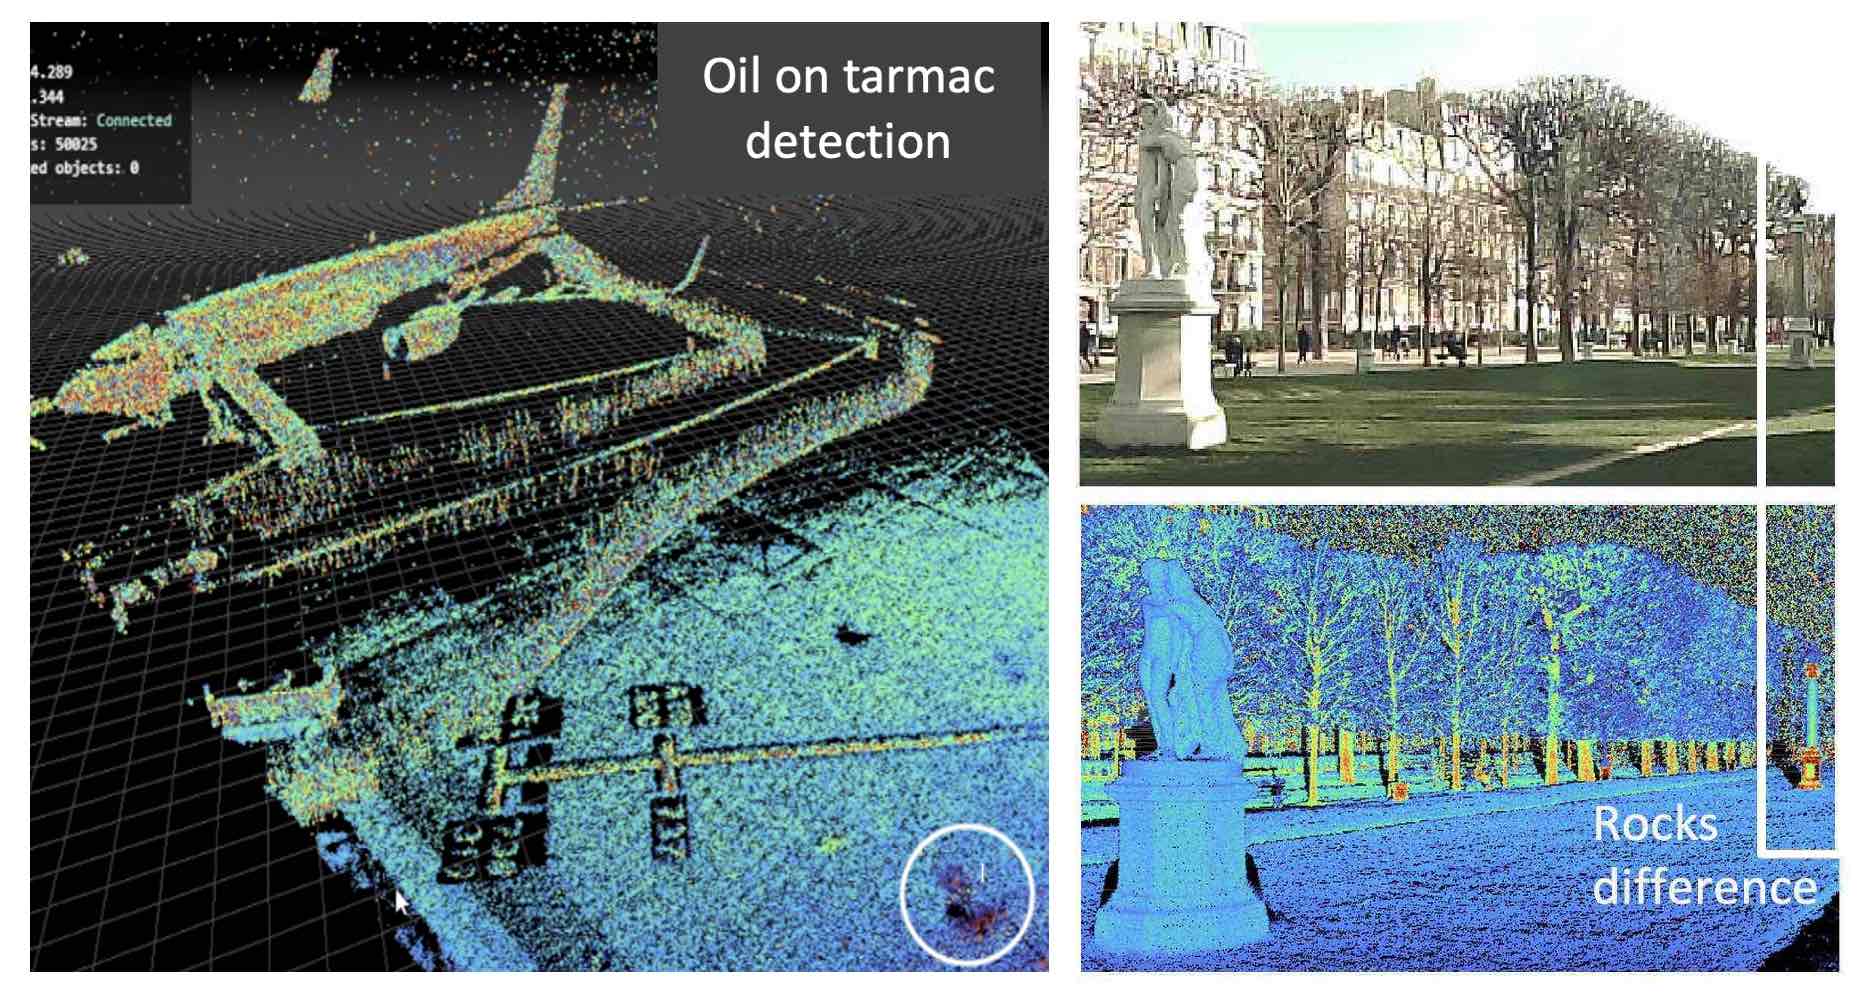 Multispectral perception of Airport in 3D shows oil on tarmac pollution and rocks discrimination